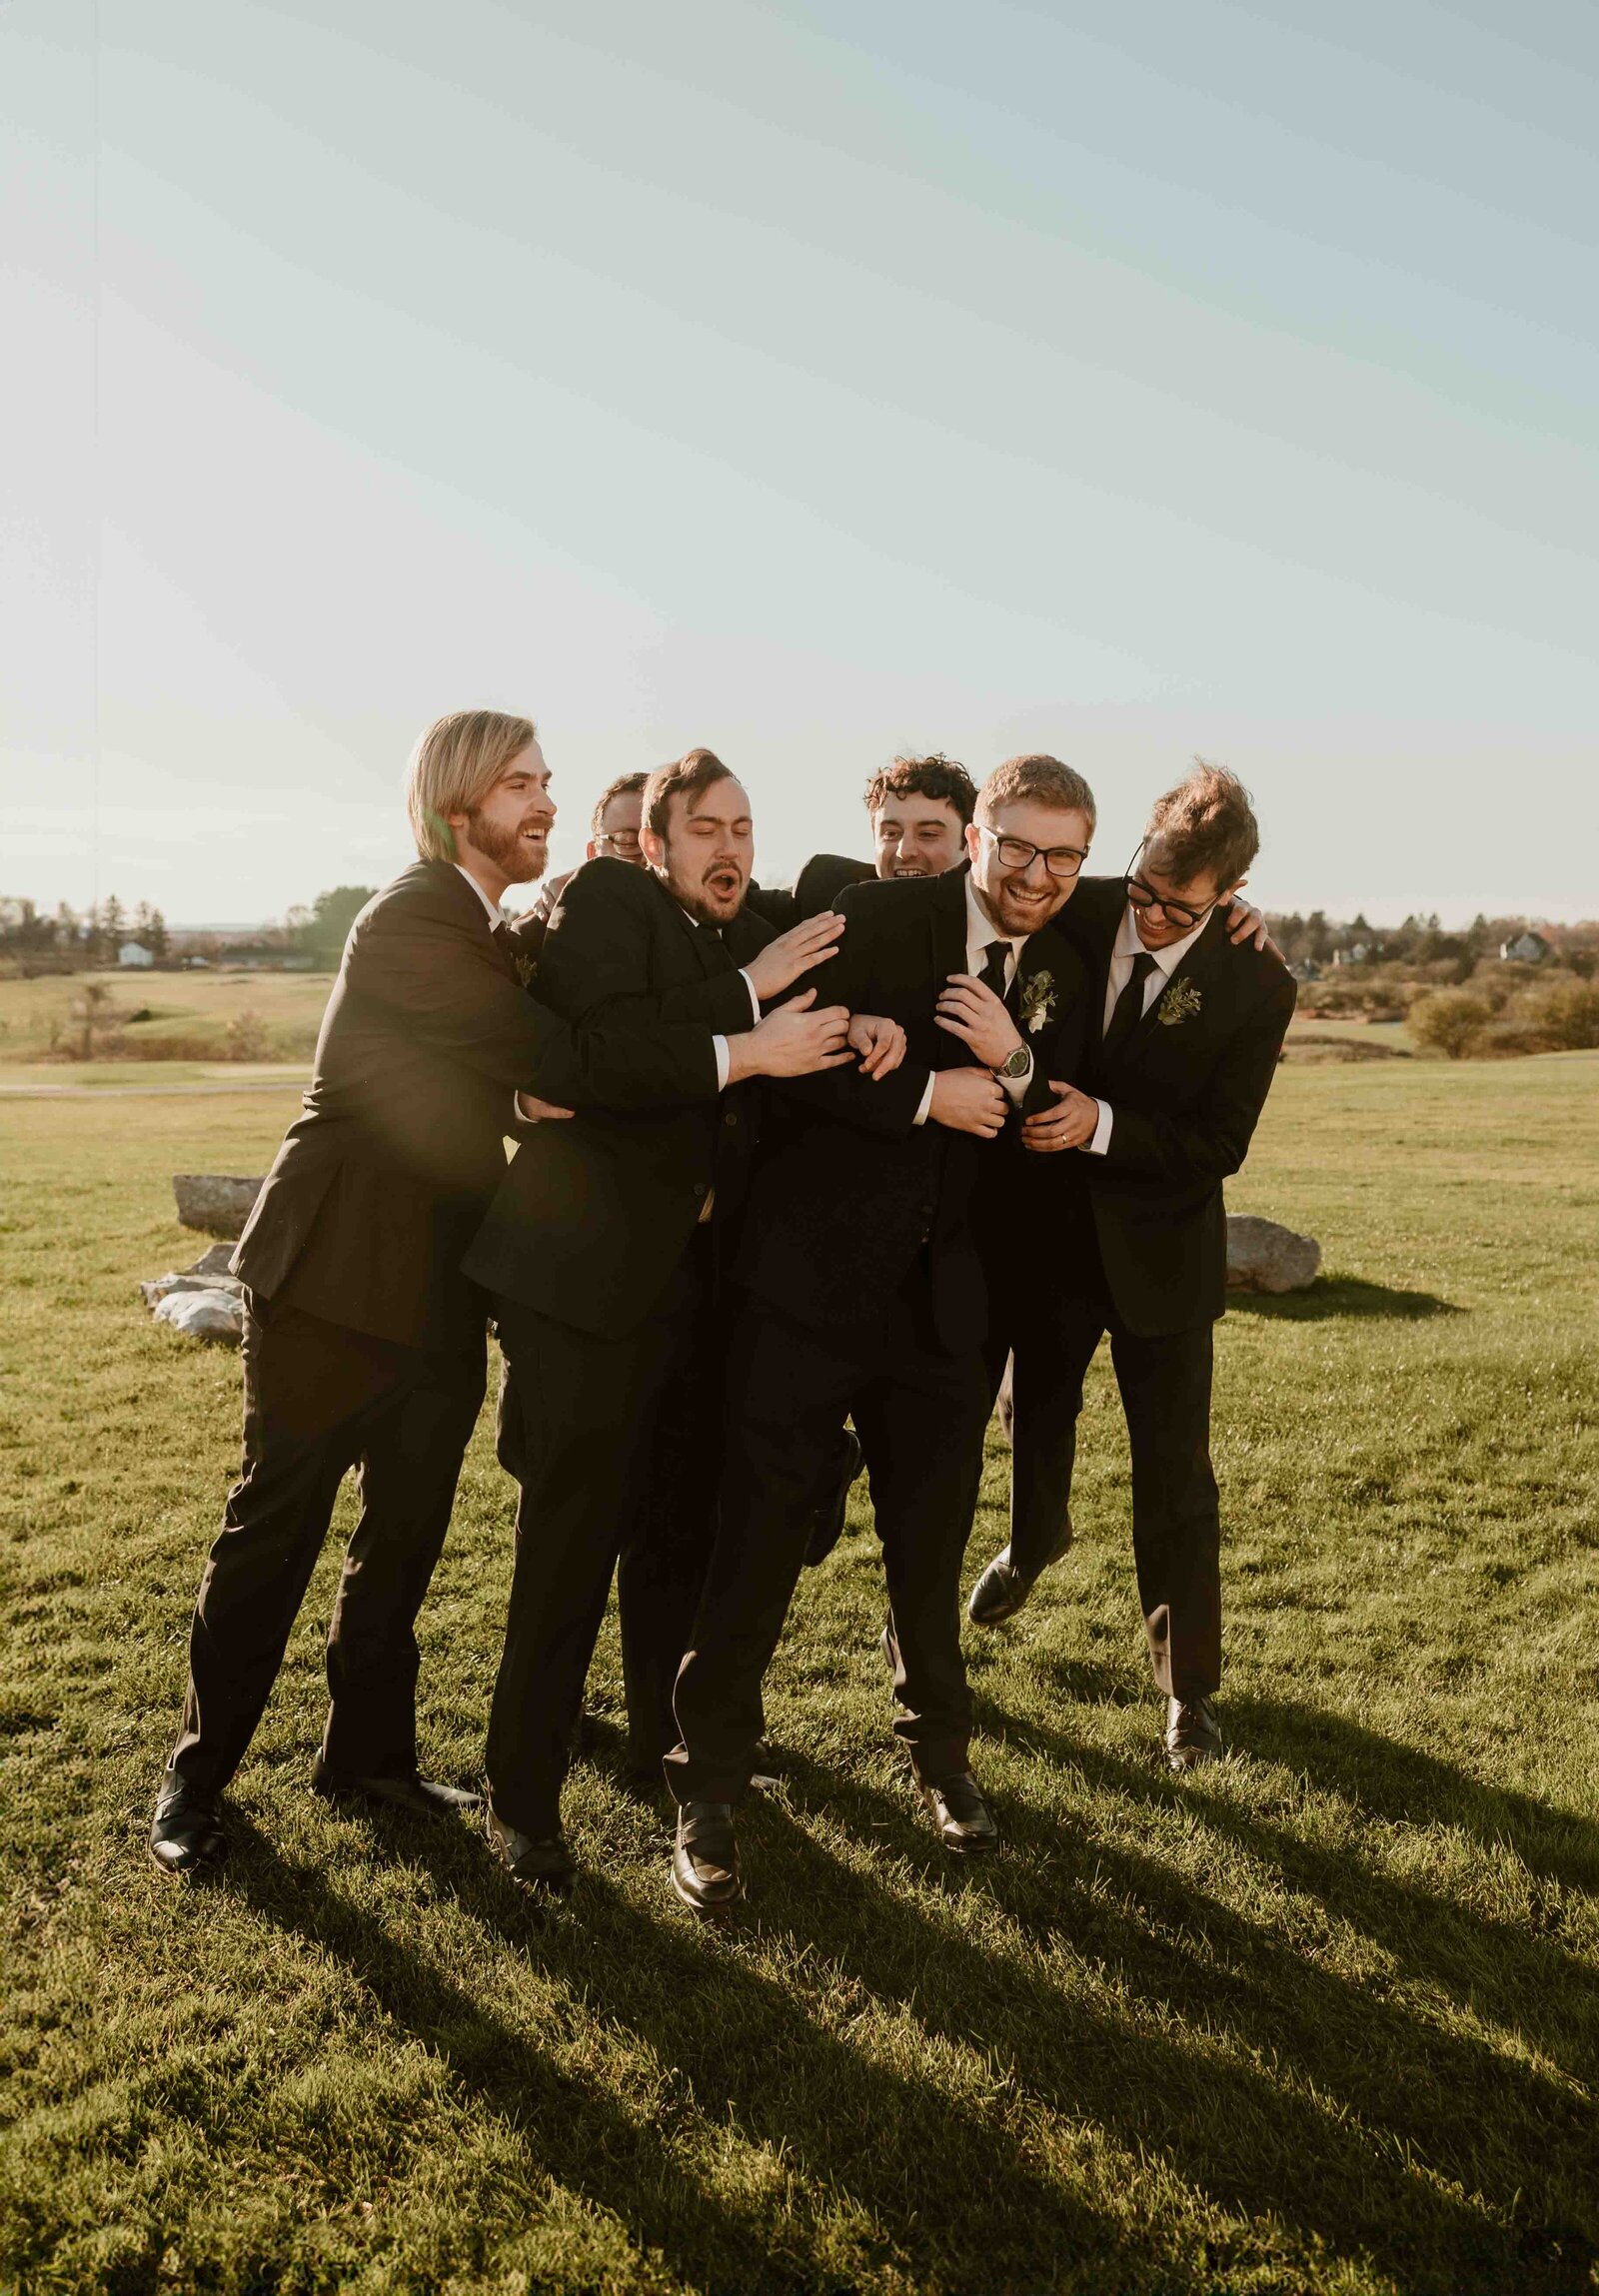 Groomsmen tackling each other.